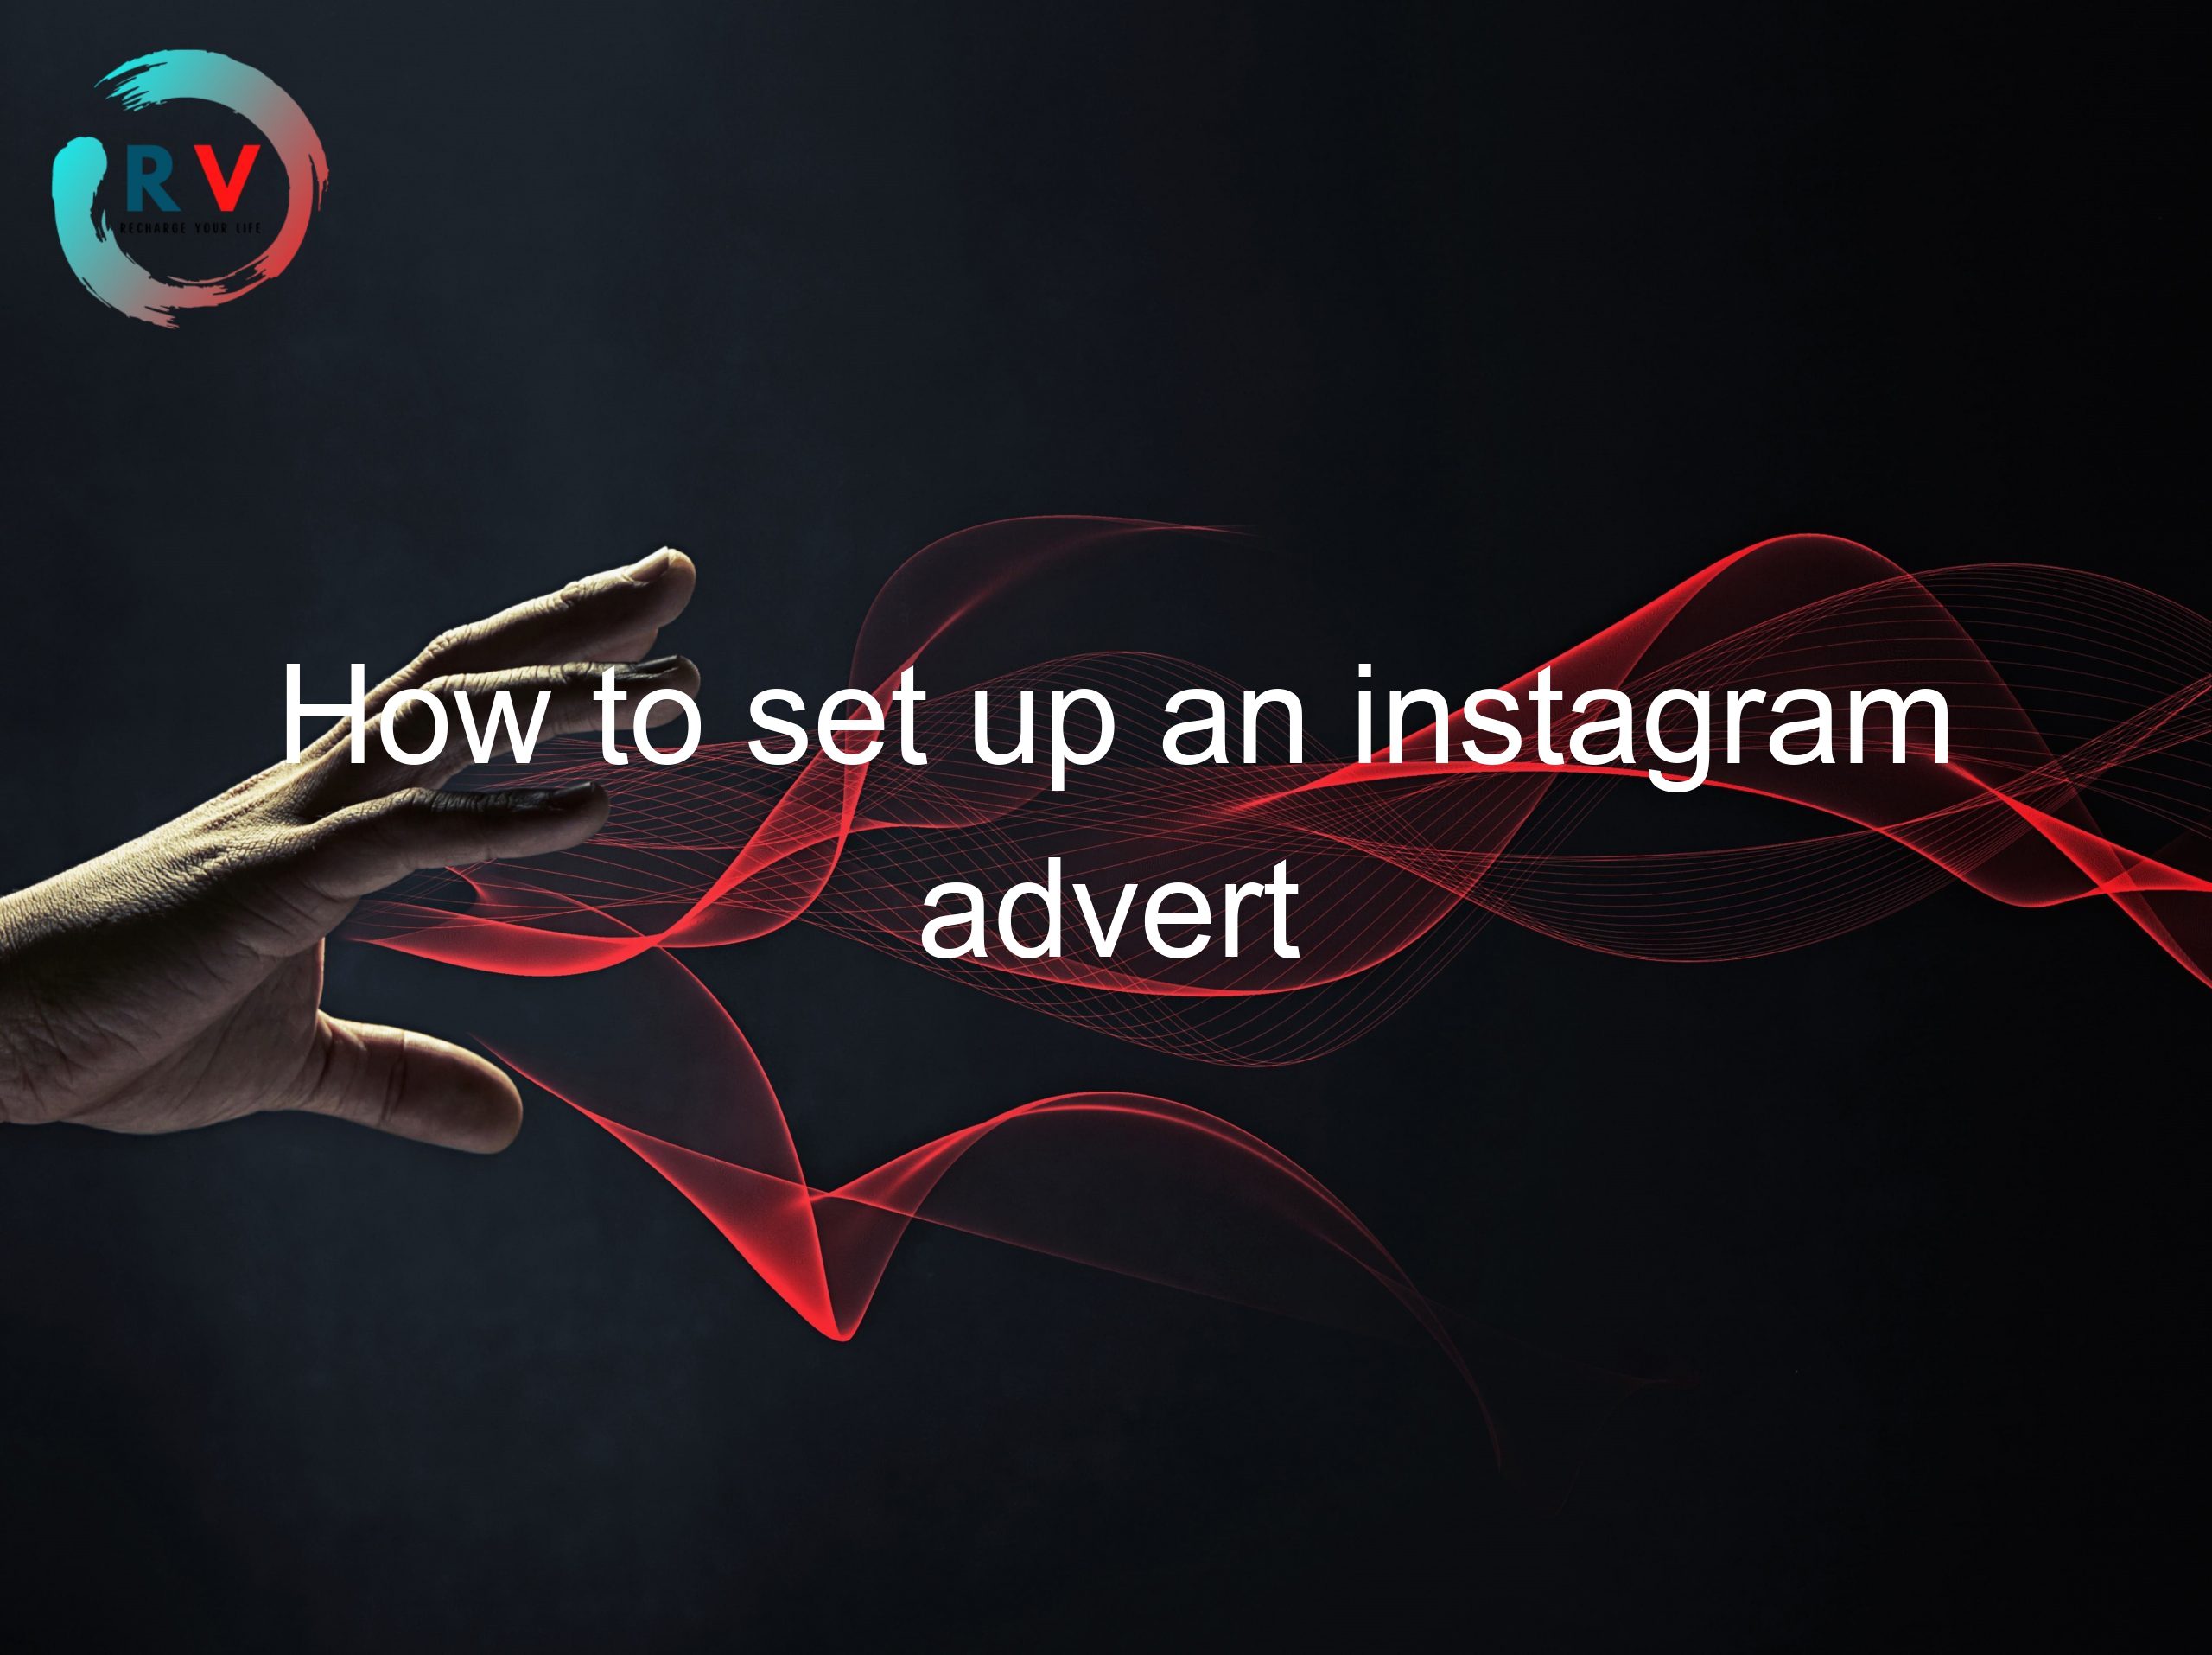 How to set up an instagram advert